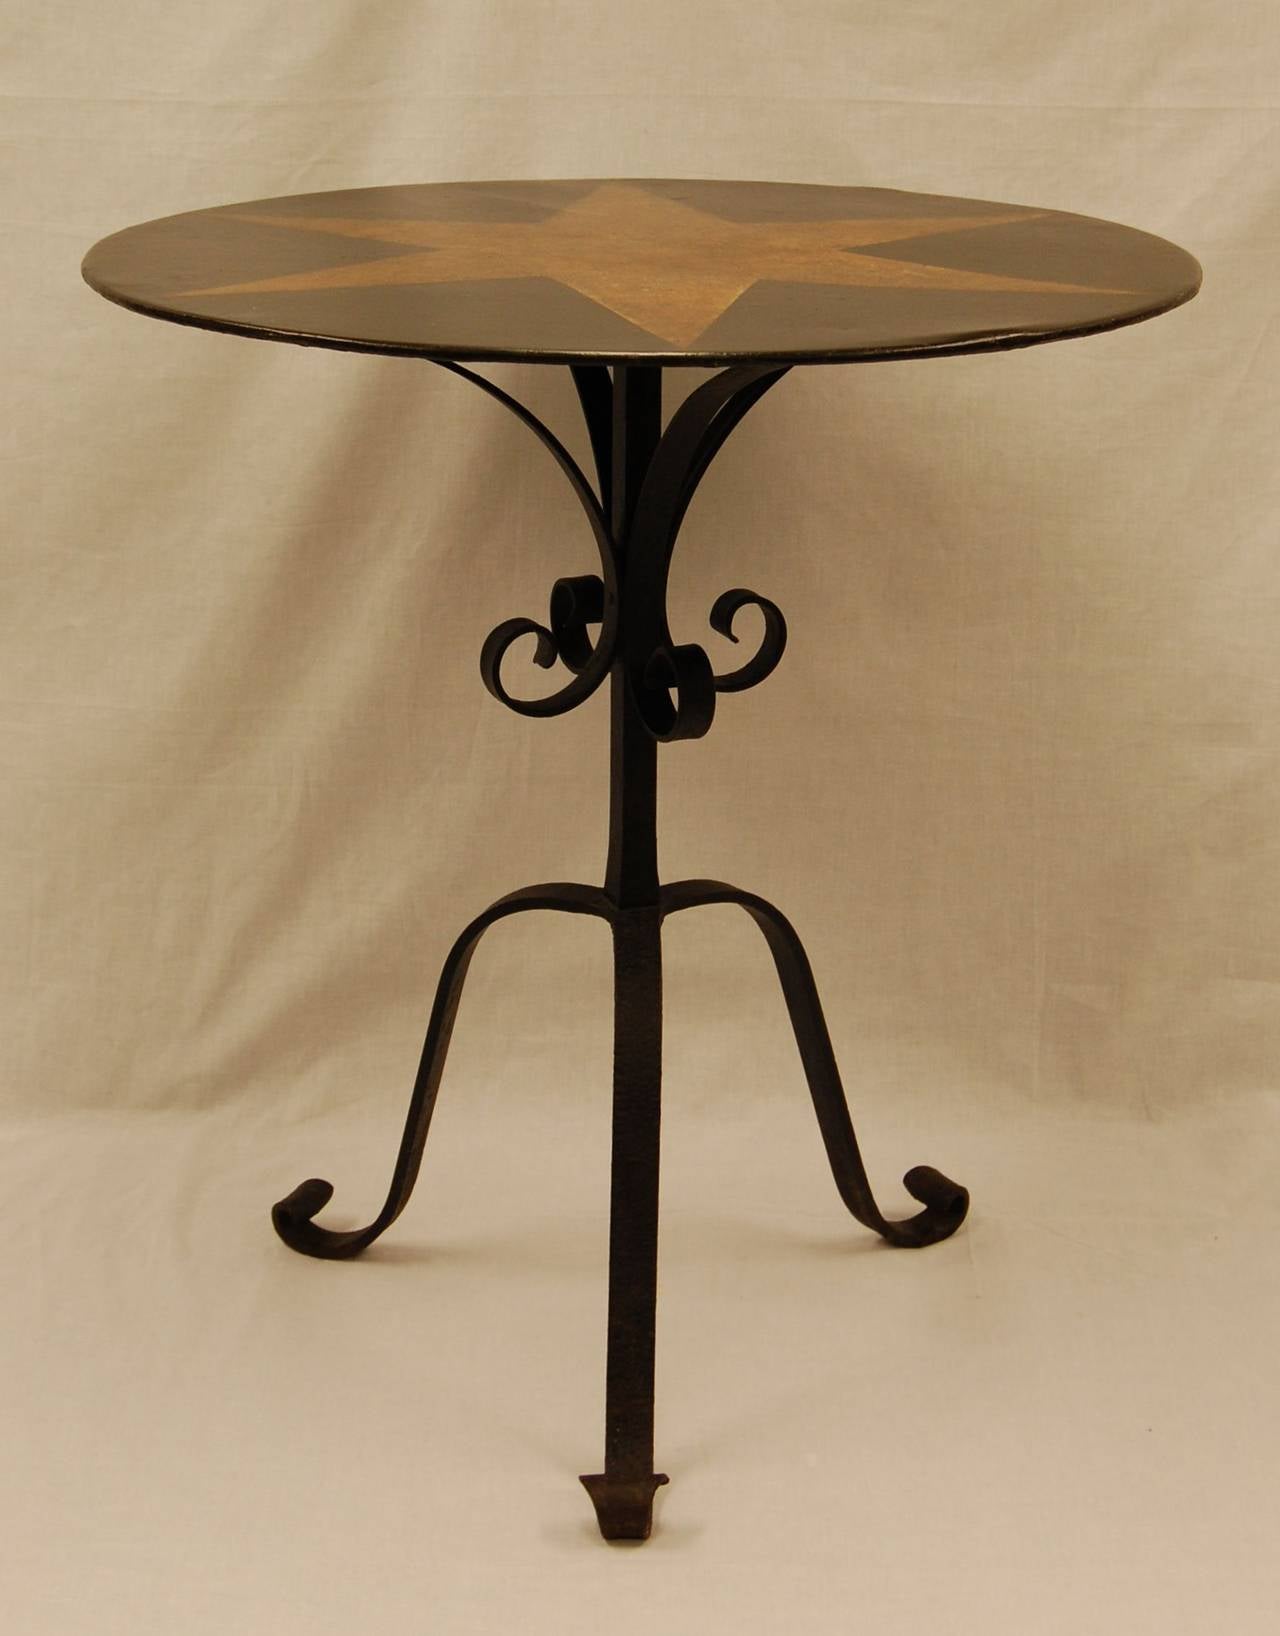 Wrought iron table base with circular painted metal top, turn of the century. Original paint in excellent condition.